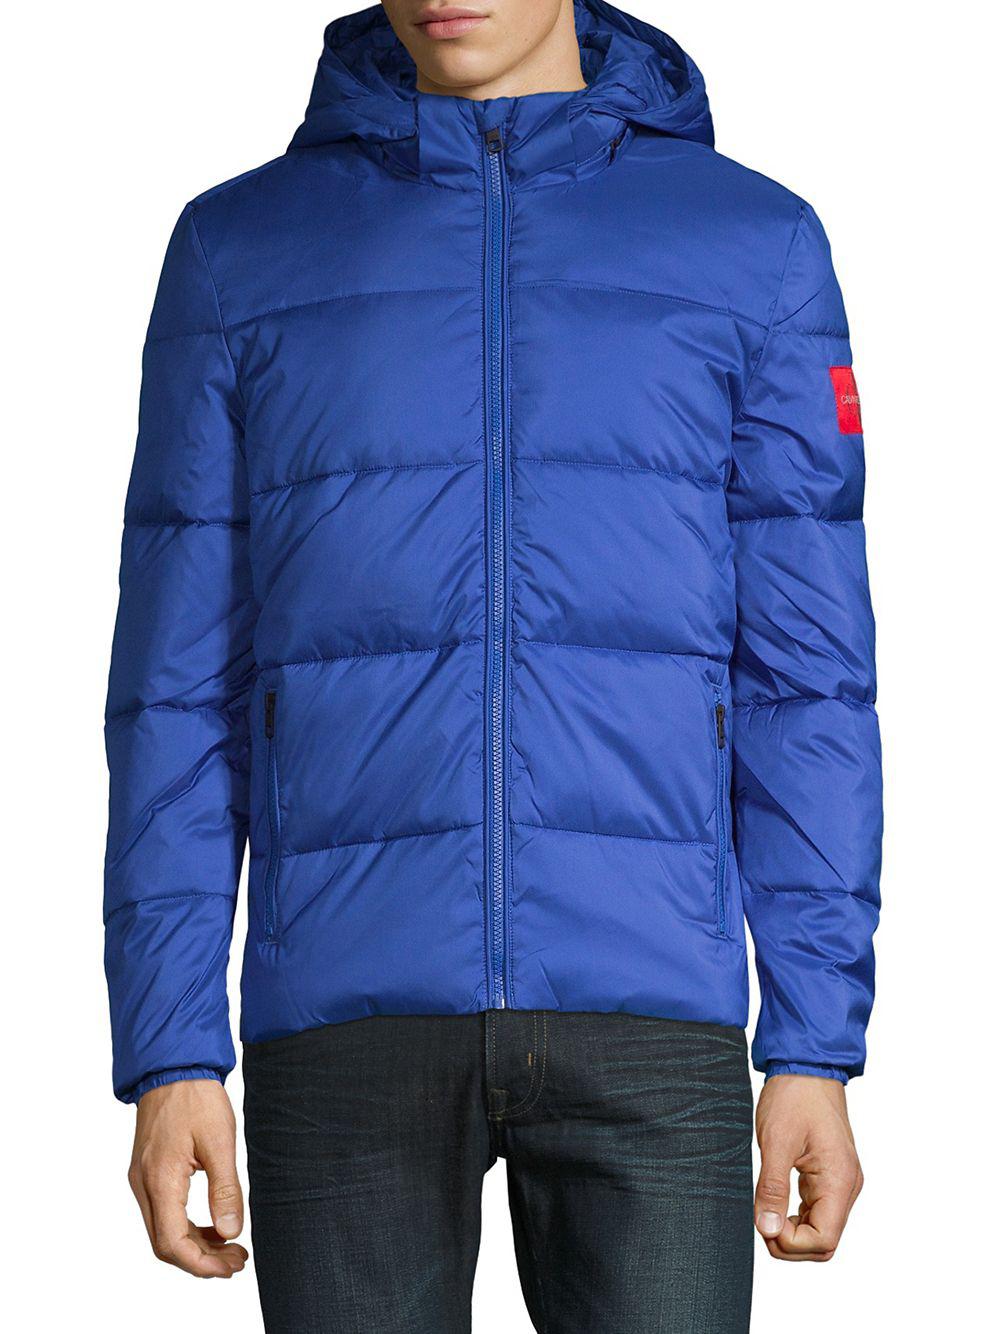 Lyst - Calvin Klein Packable Quilted Puffer Jacket in Blue for Men